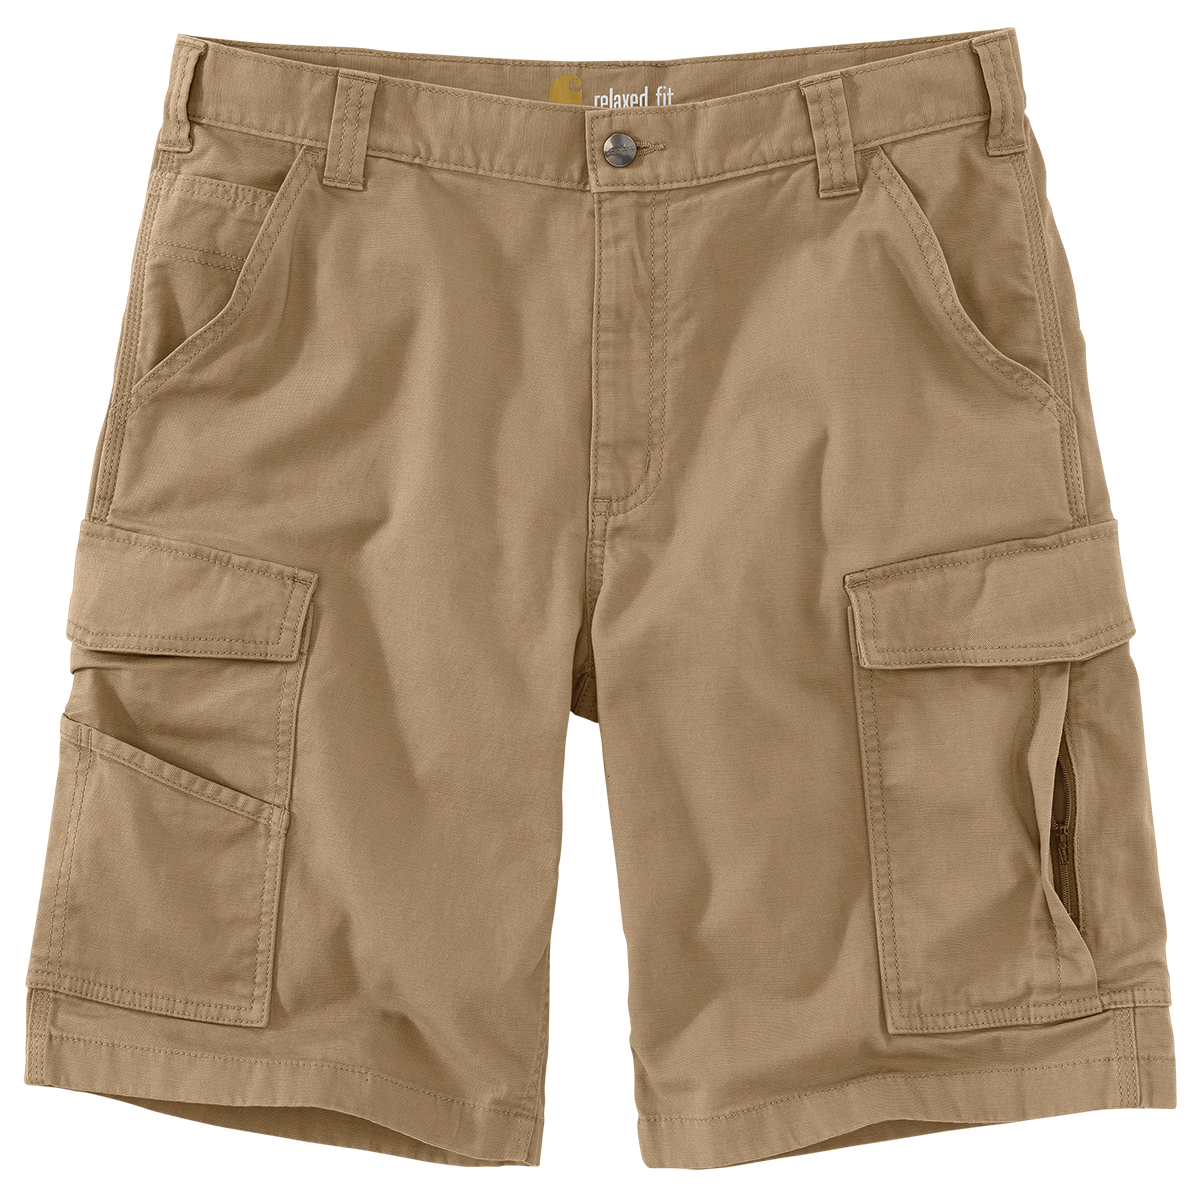 Carhartt Men's 103542 Rugged Flex Relaxed Fit Canvas Cargo Work Shorts, Extended Sizes, Brown